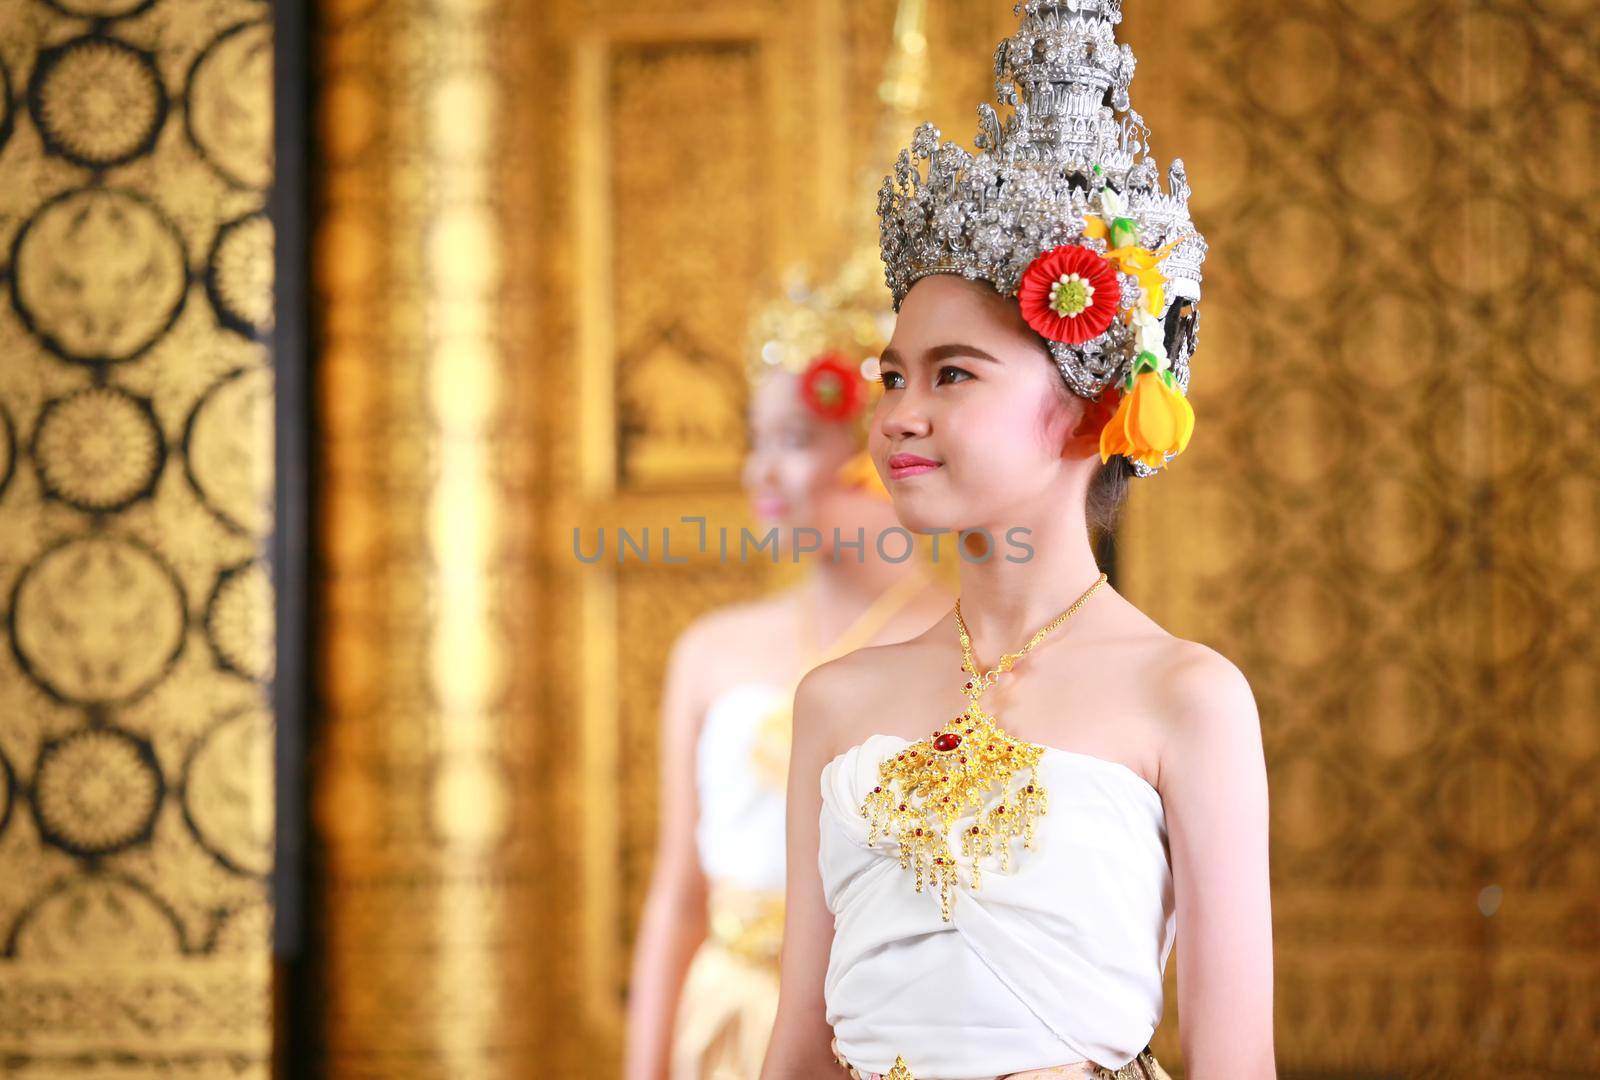 Thai traditional dress. Young kid Actors performs Thai ancient dancing Art of Thai classical dance in Thailand